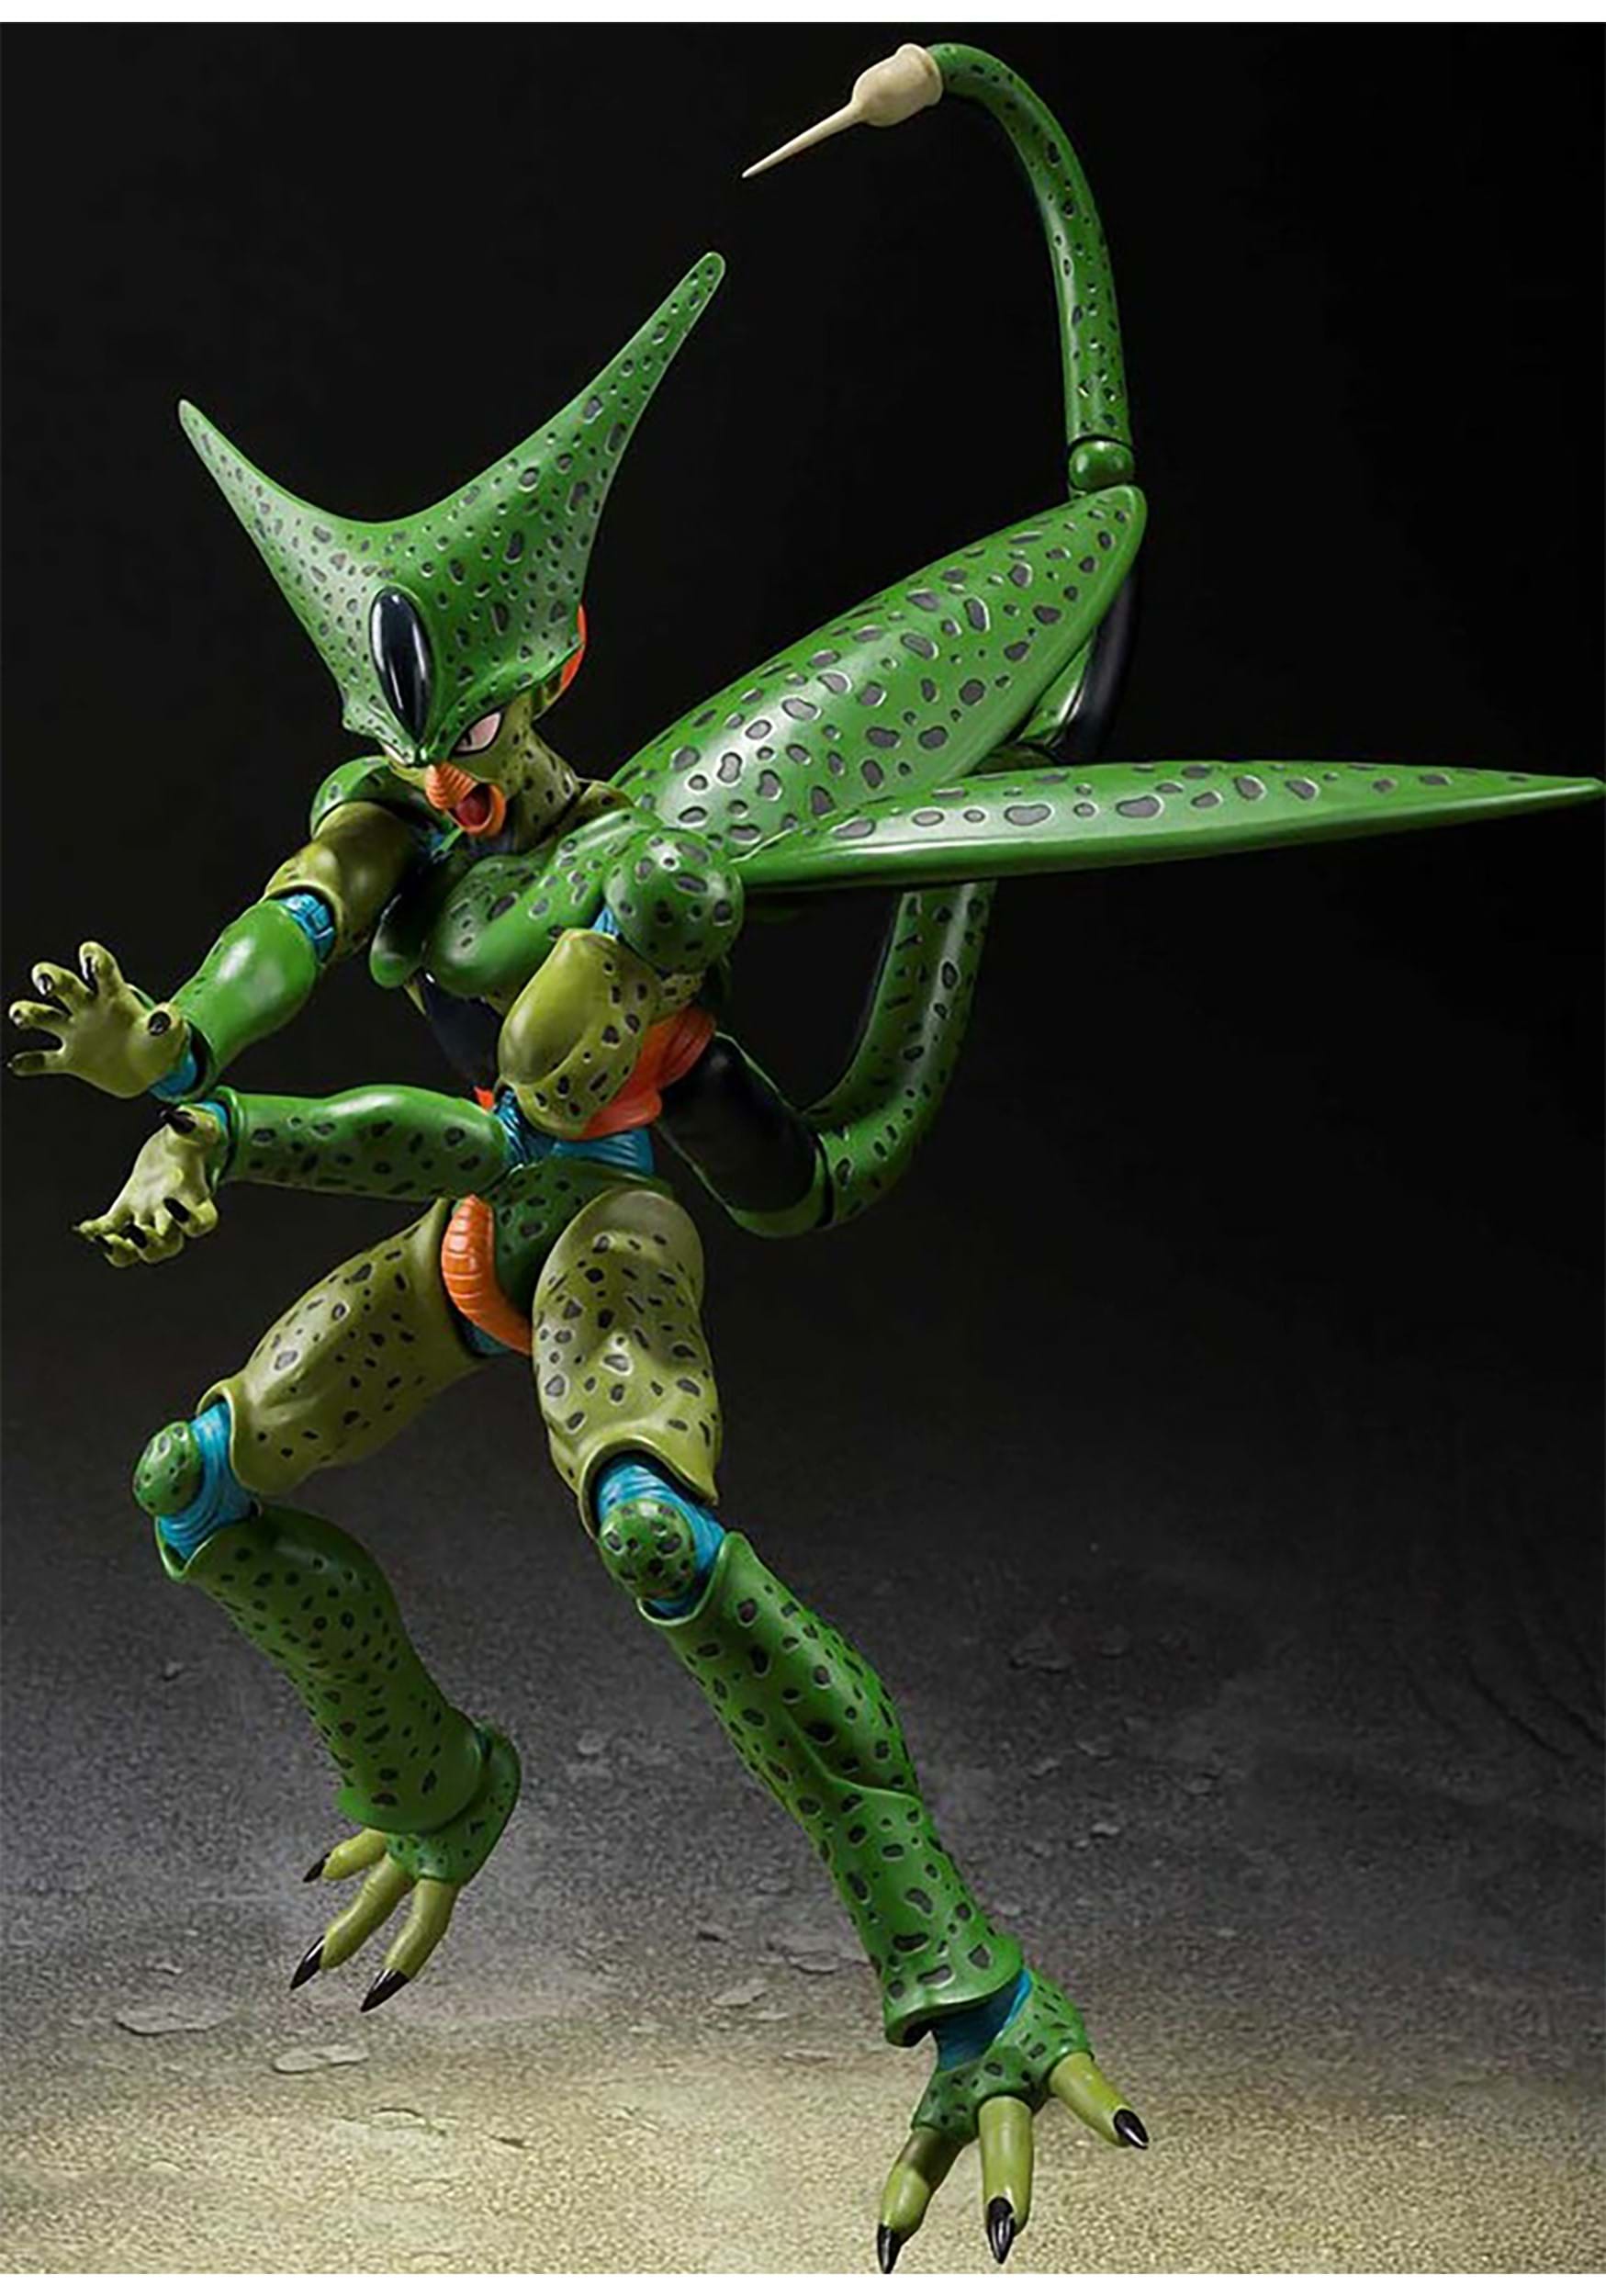 Dragon Ball Z Bandai S.H. Figuarts Cell First Form Action Figure